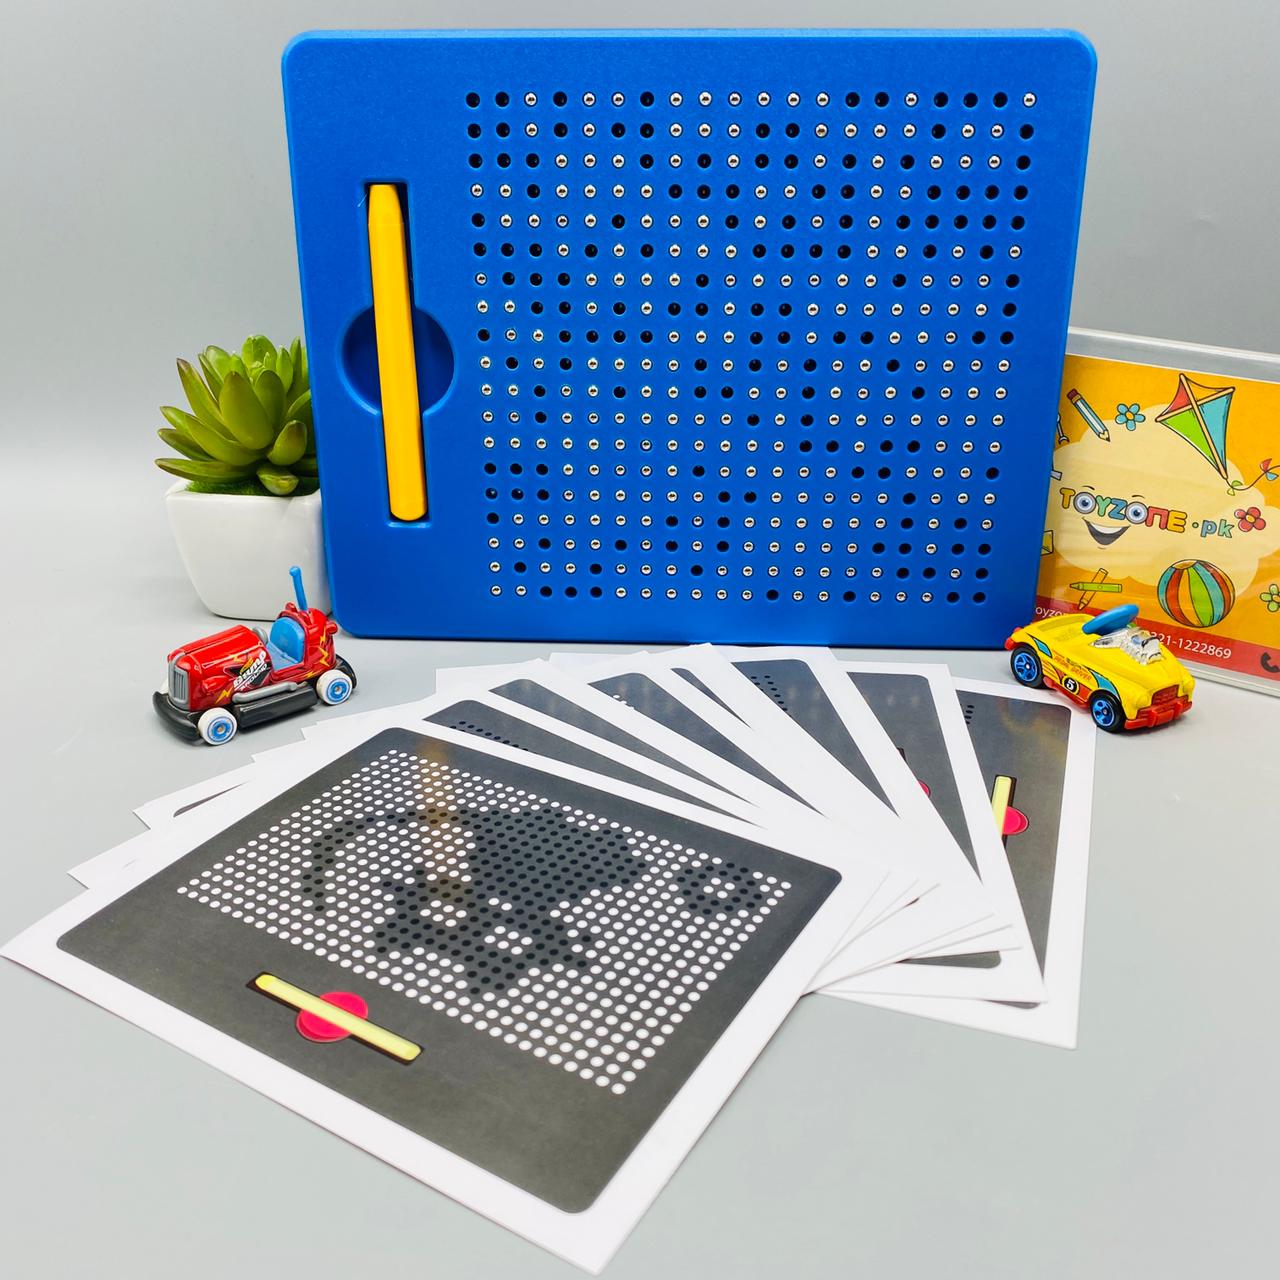 360 pieces mini magnetic drawing board pad